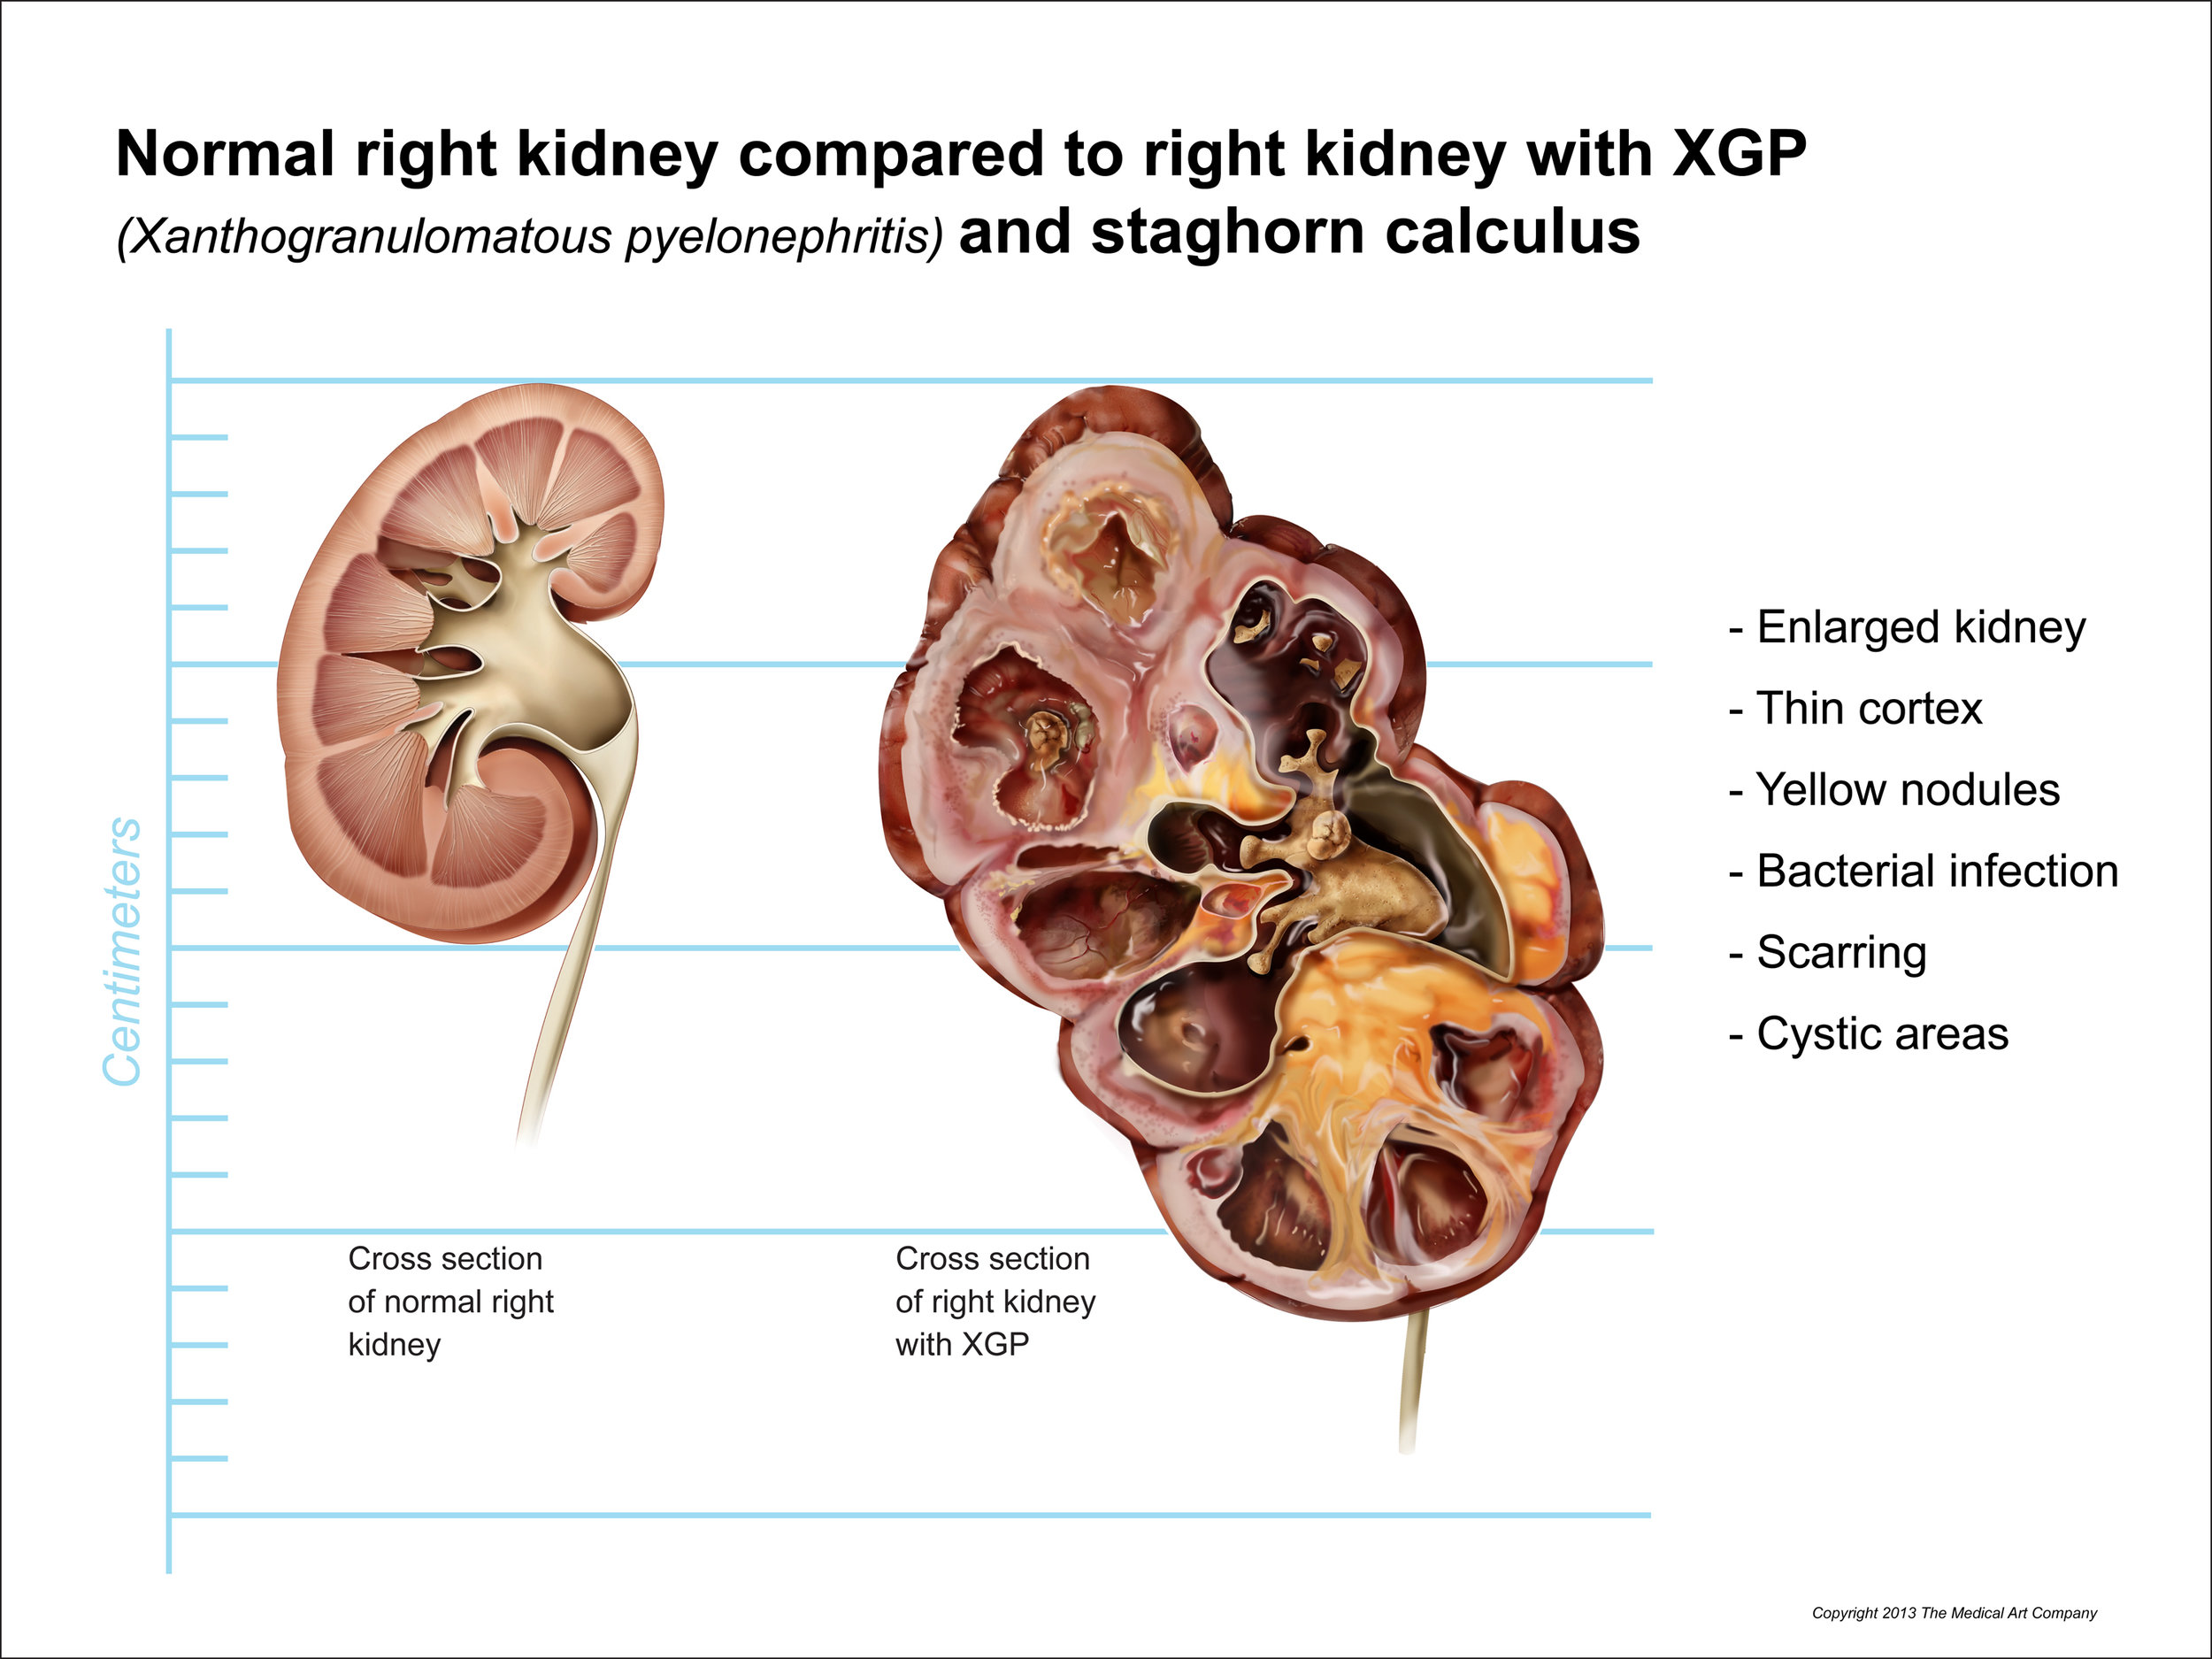 Normal Right Kidney Compared to Right Kidney with Xanthogranulomatous pyelonephritis (XGP)